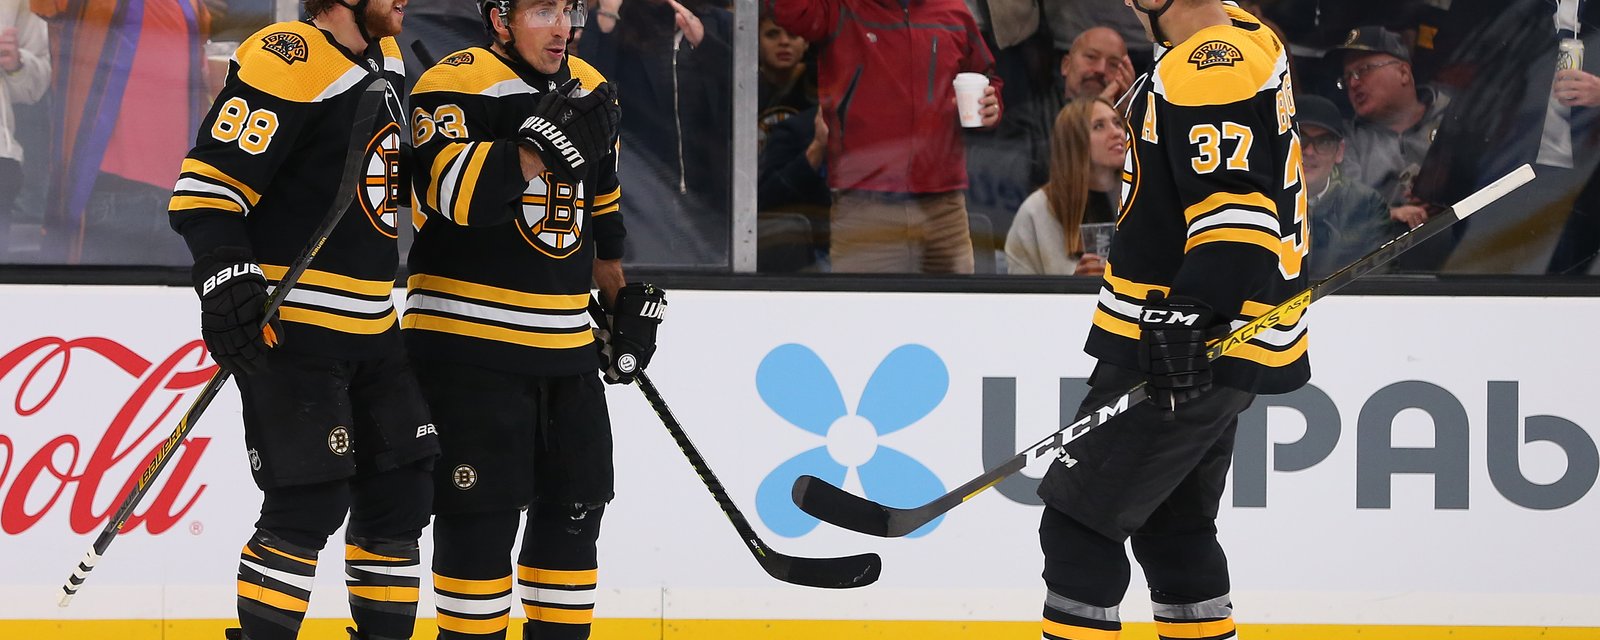 The new NHL 20 ratings are out and the Bruins look terrifyingly good